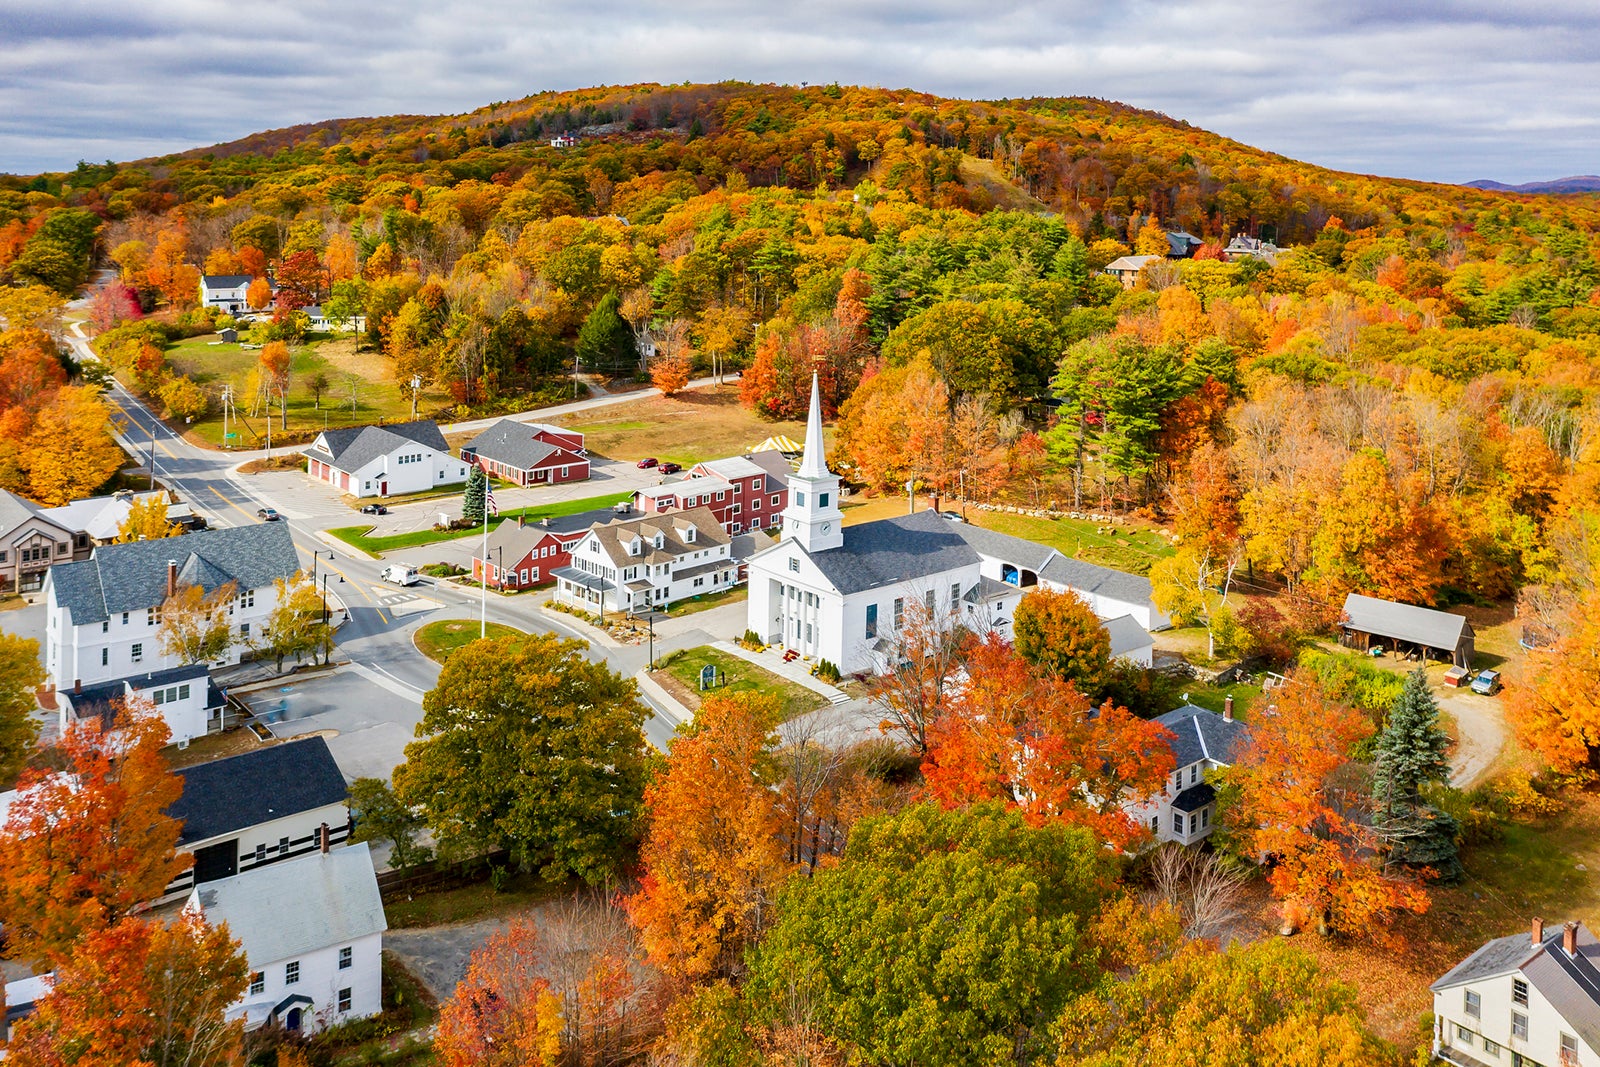 New England road trip: Where to see the most spectacular foliage this fall  - The Points Guy